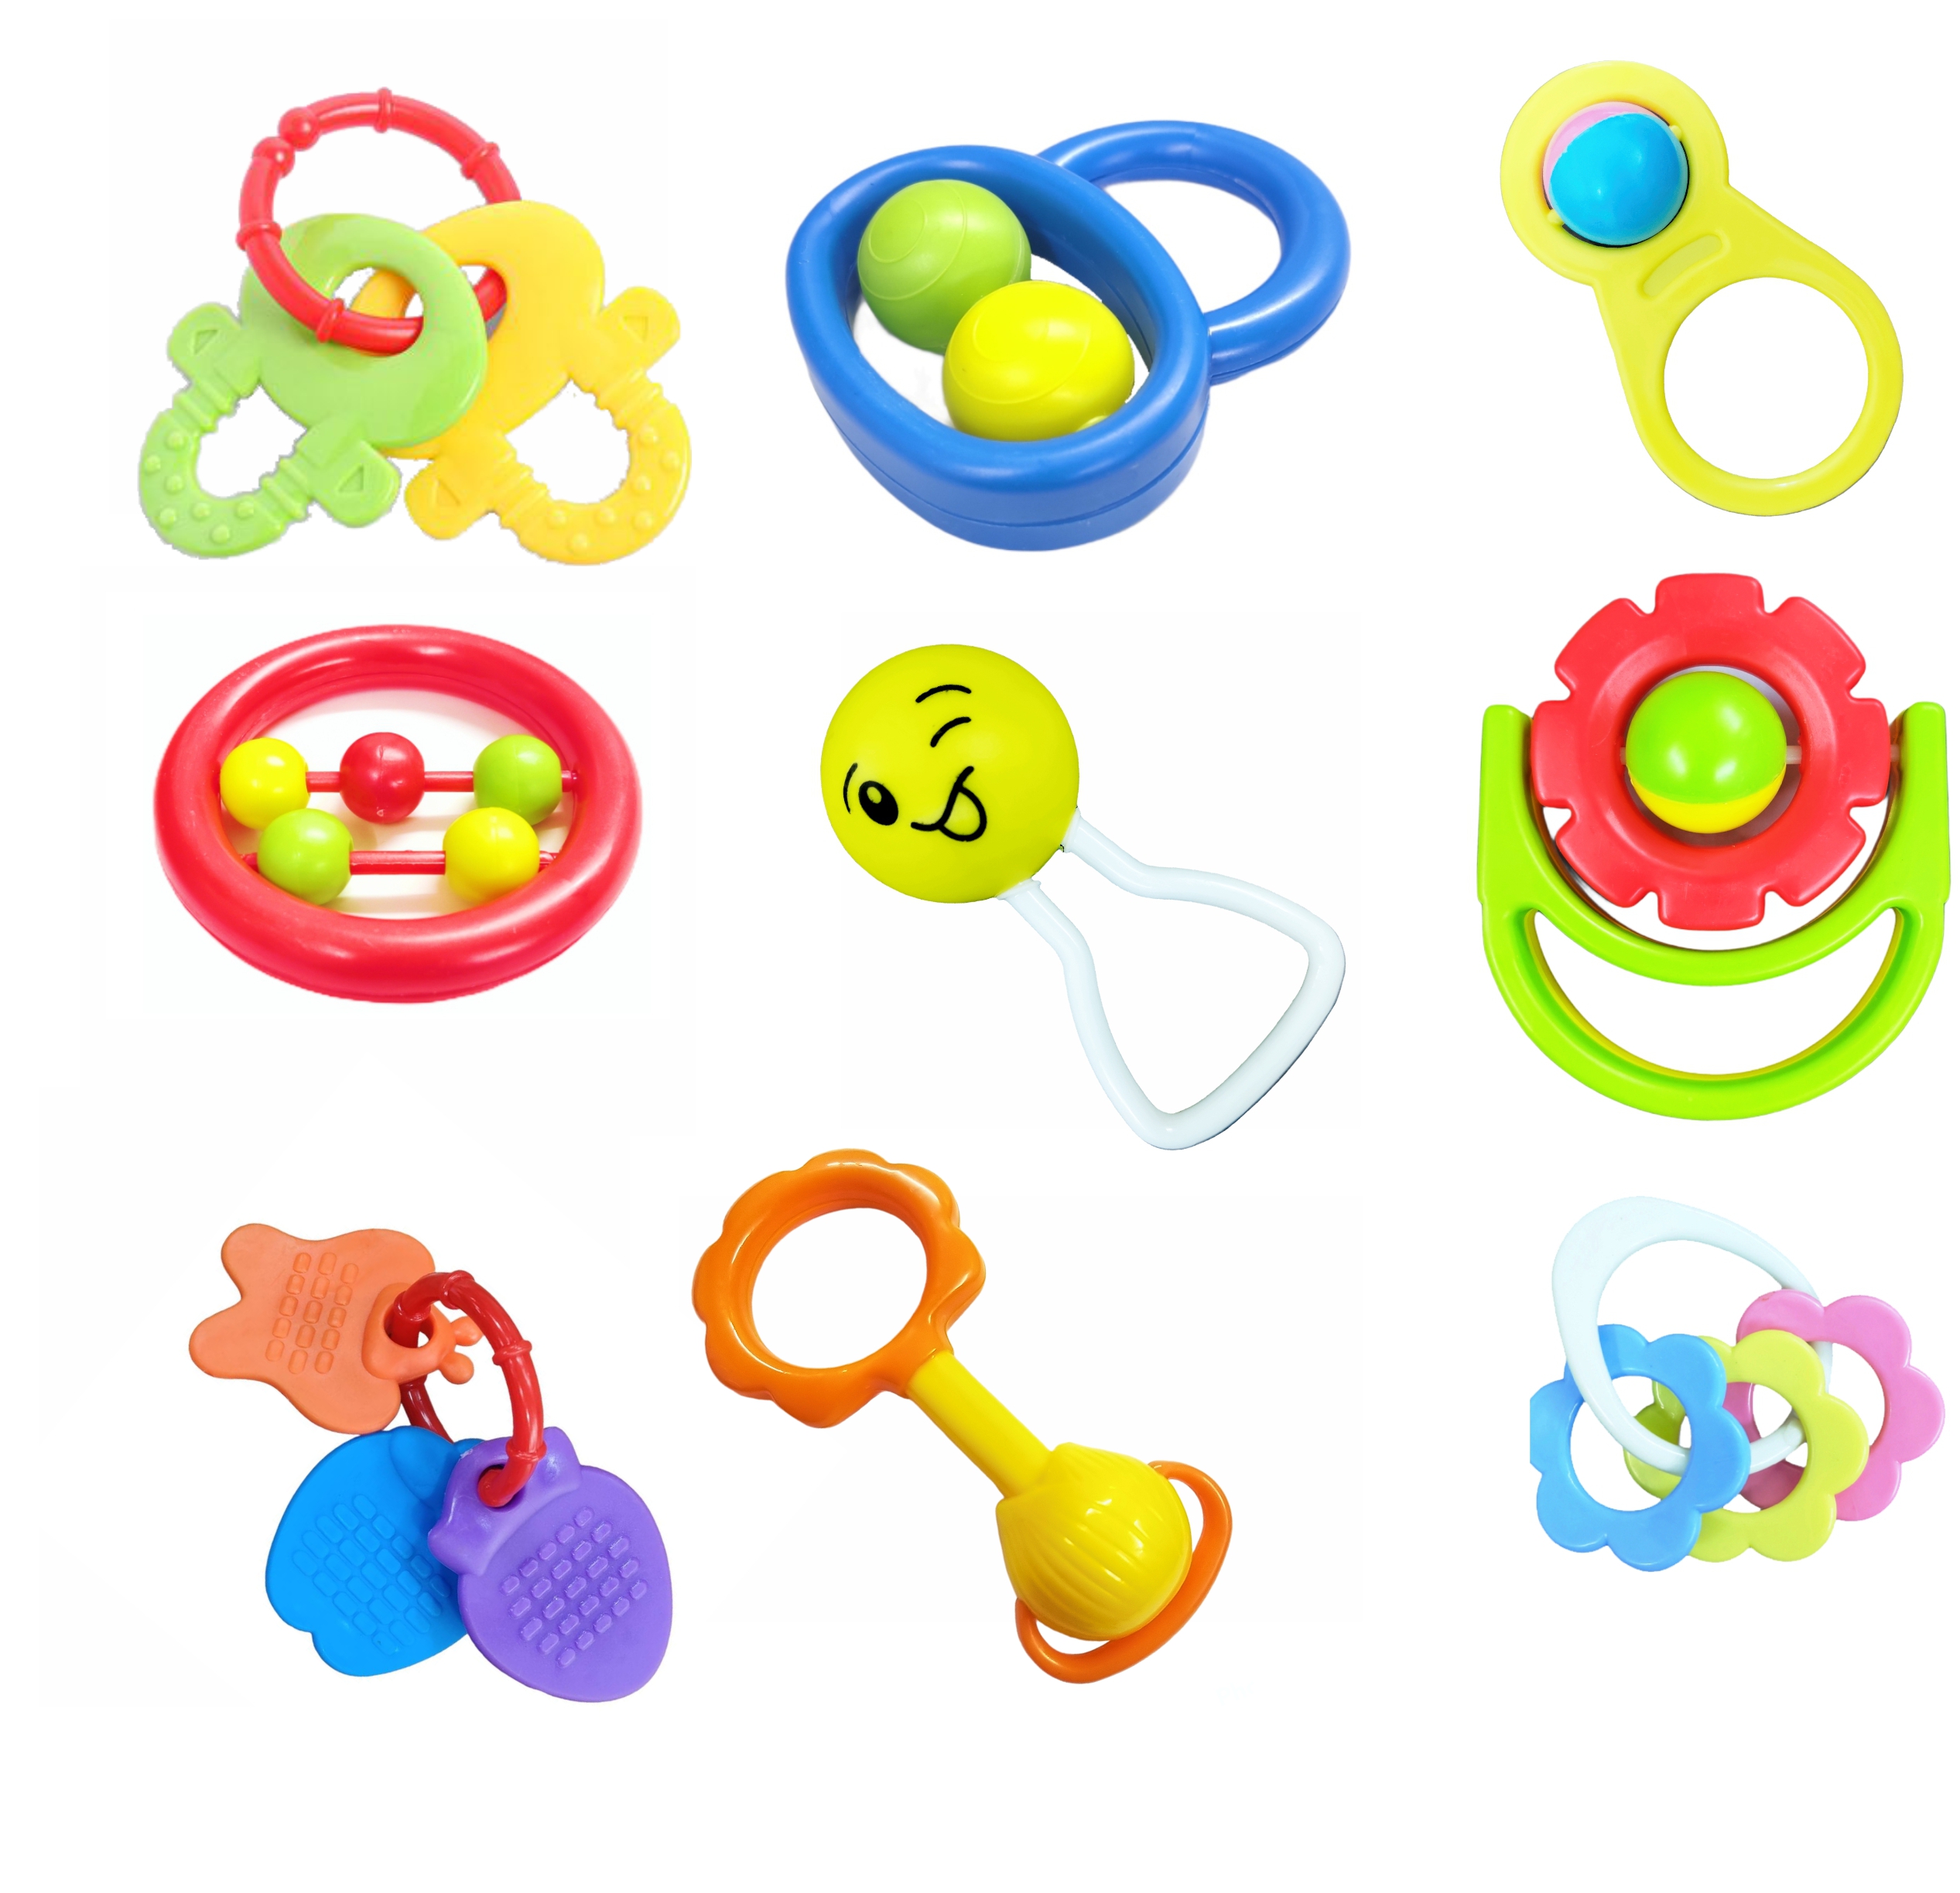 Plastic Baby Rattles And Teethers